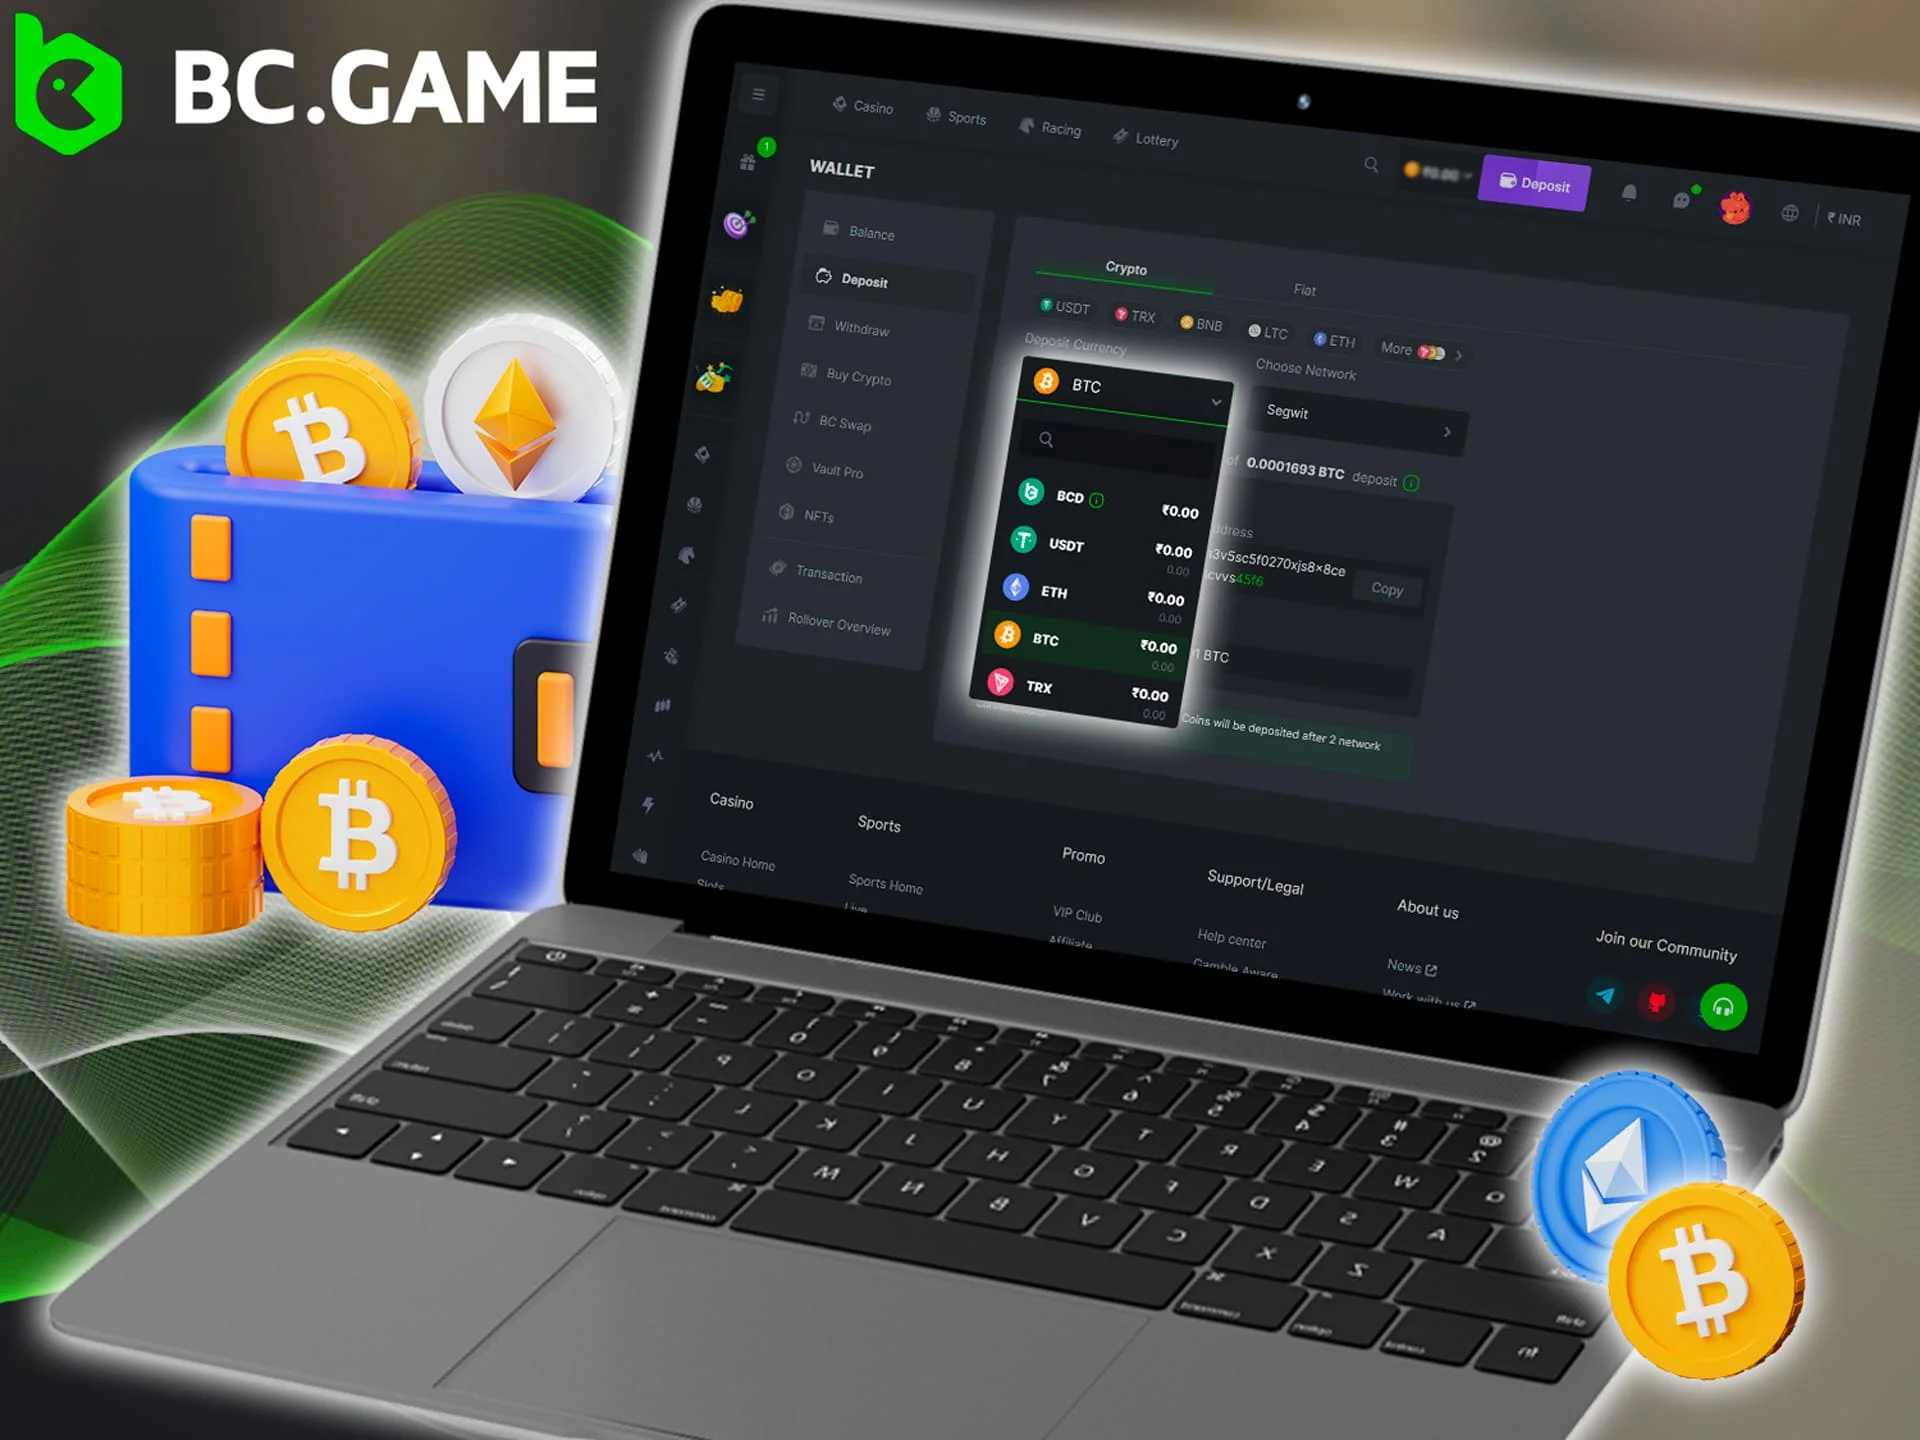 BC Game offers convenient ways to fund your account with different types of cryptocurrency.